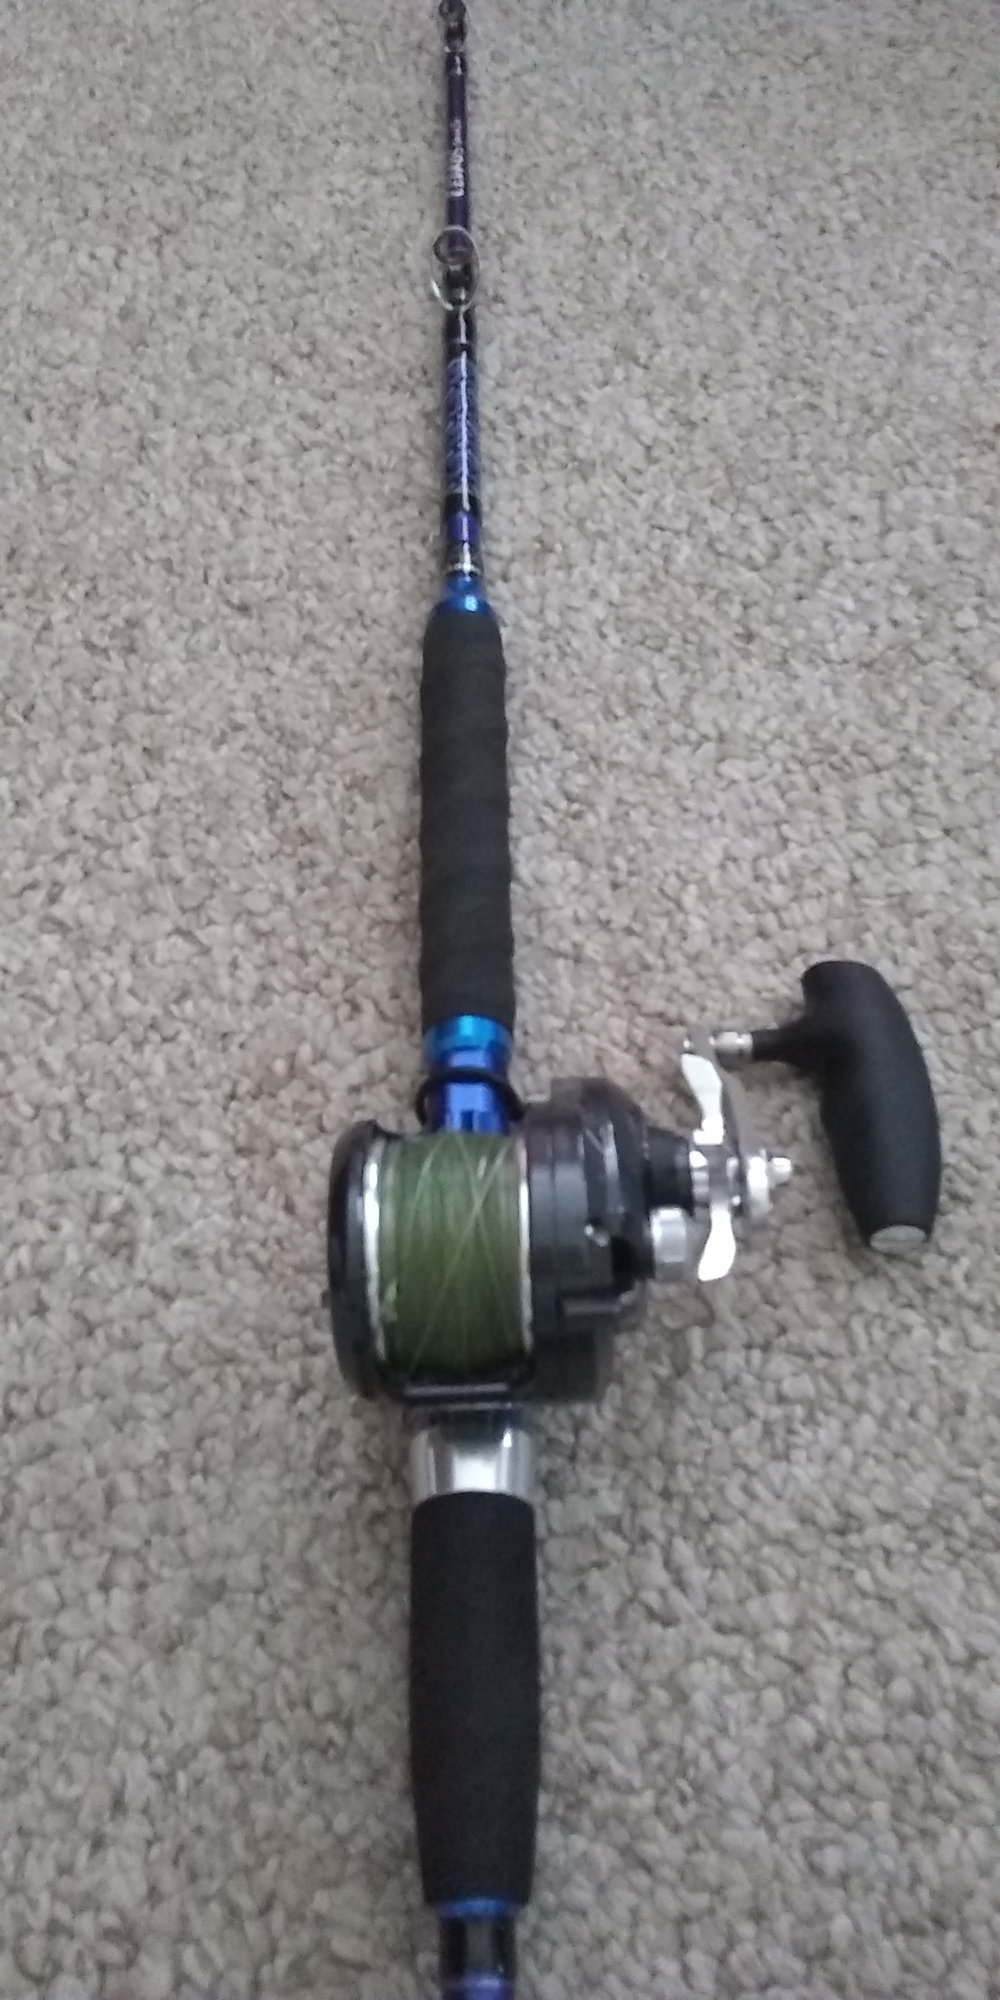 Best bottom fishing reels/rods - The Hull Truth - Boating and Fishing Forum